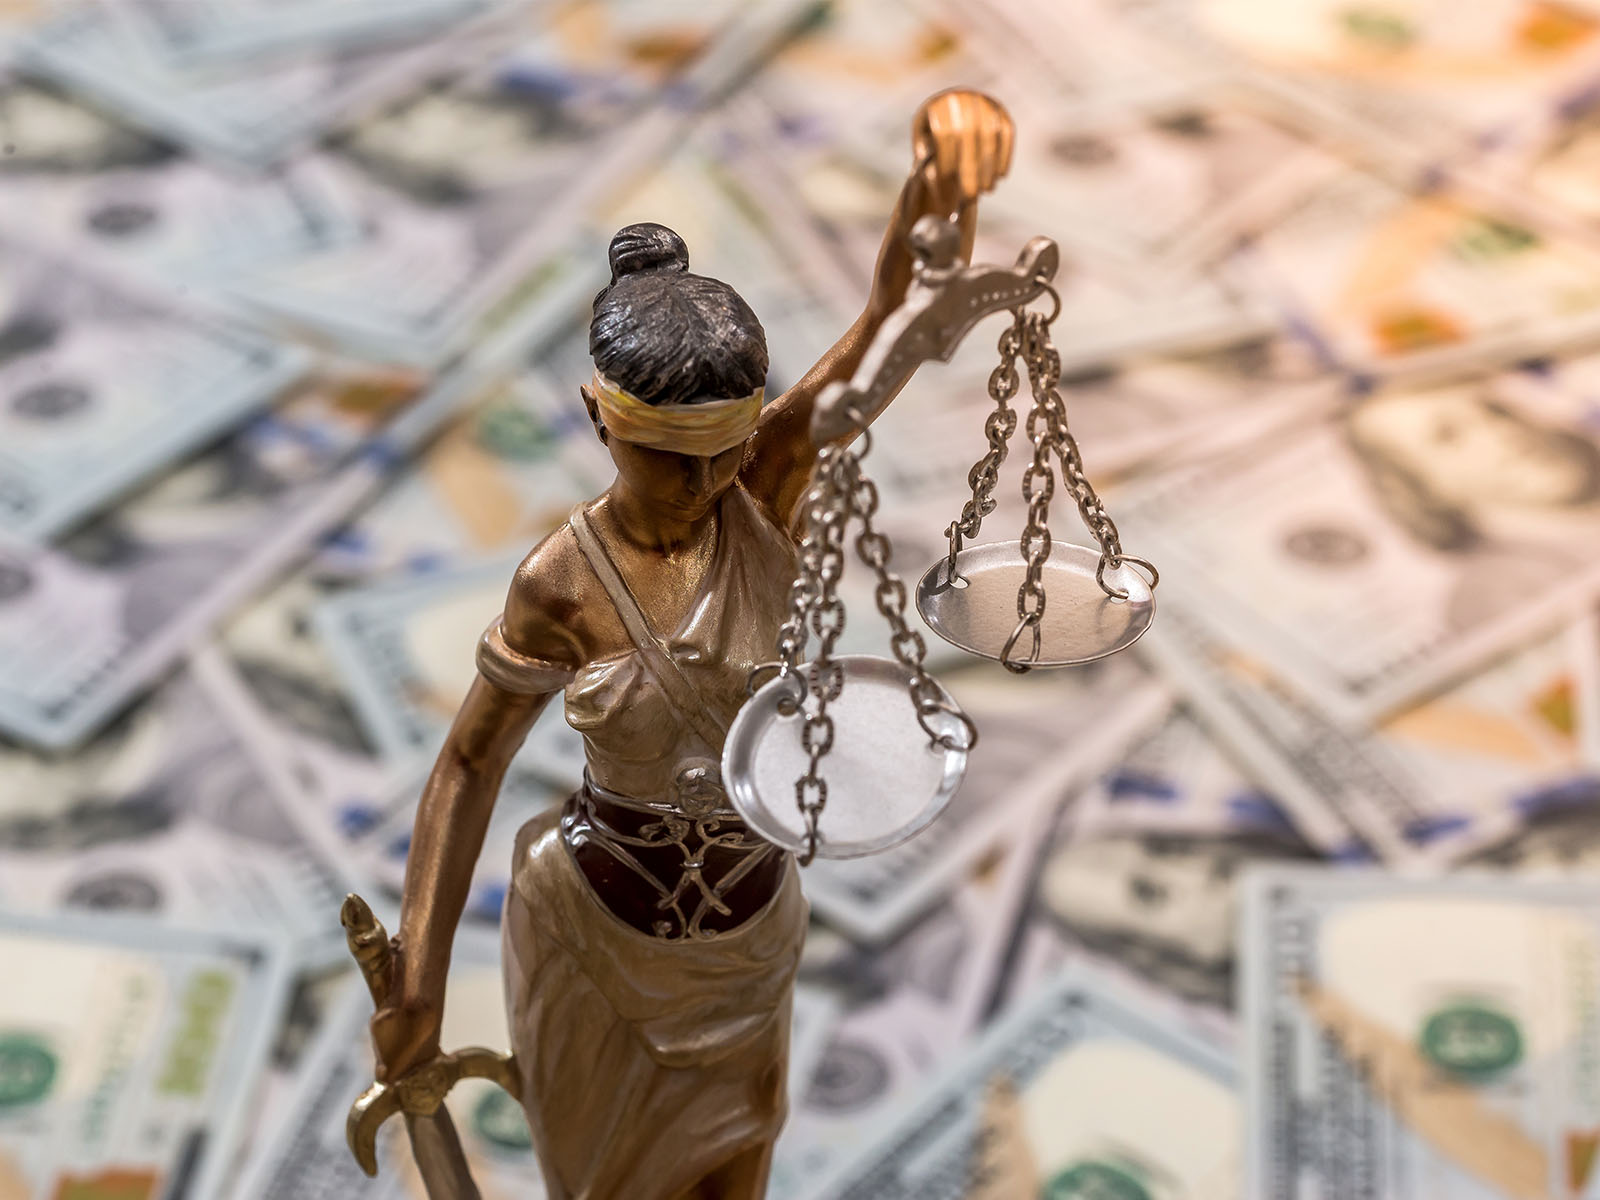 This photo illustration shows a bronze statue of blind Justice holding scales. The background is a scattering of U.S. dollars. This art is related to a story about AML Compliance, money laundering, etc.